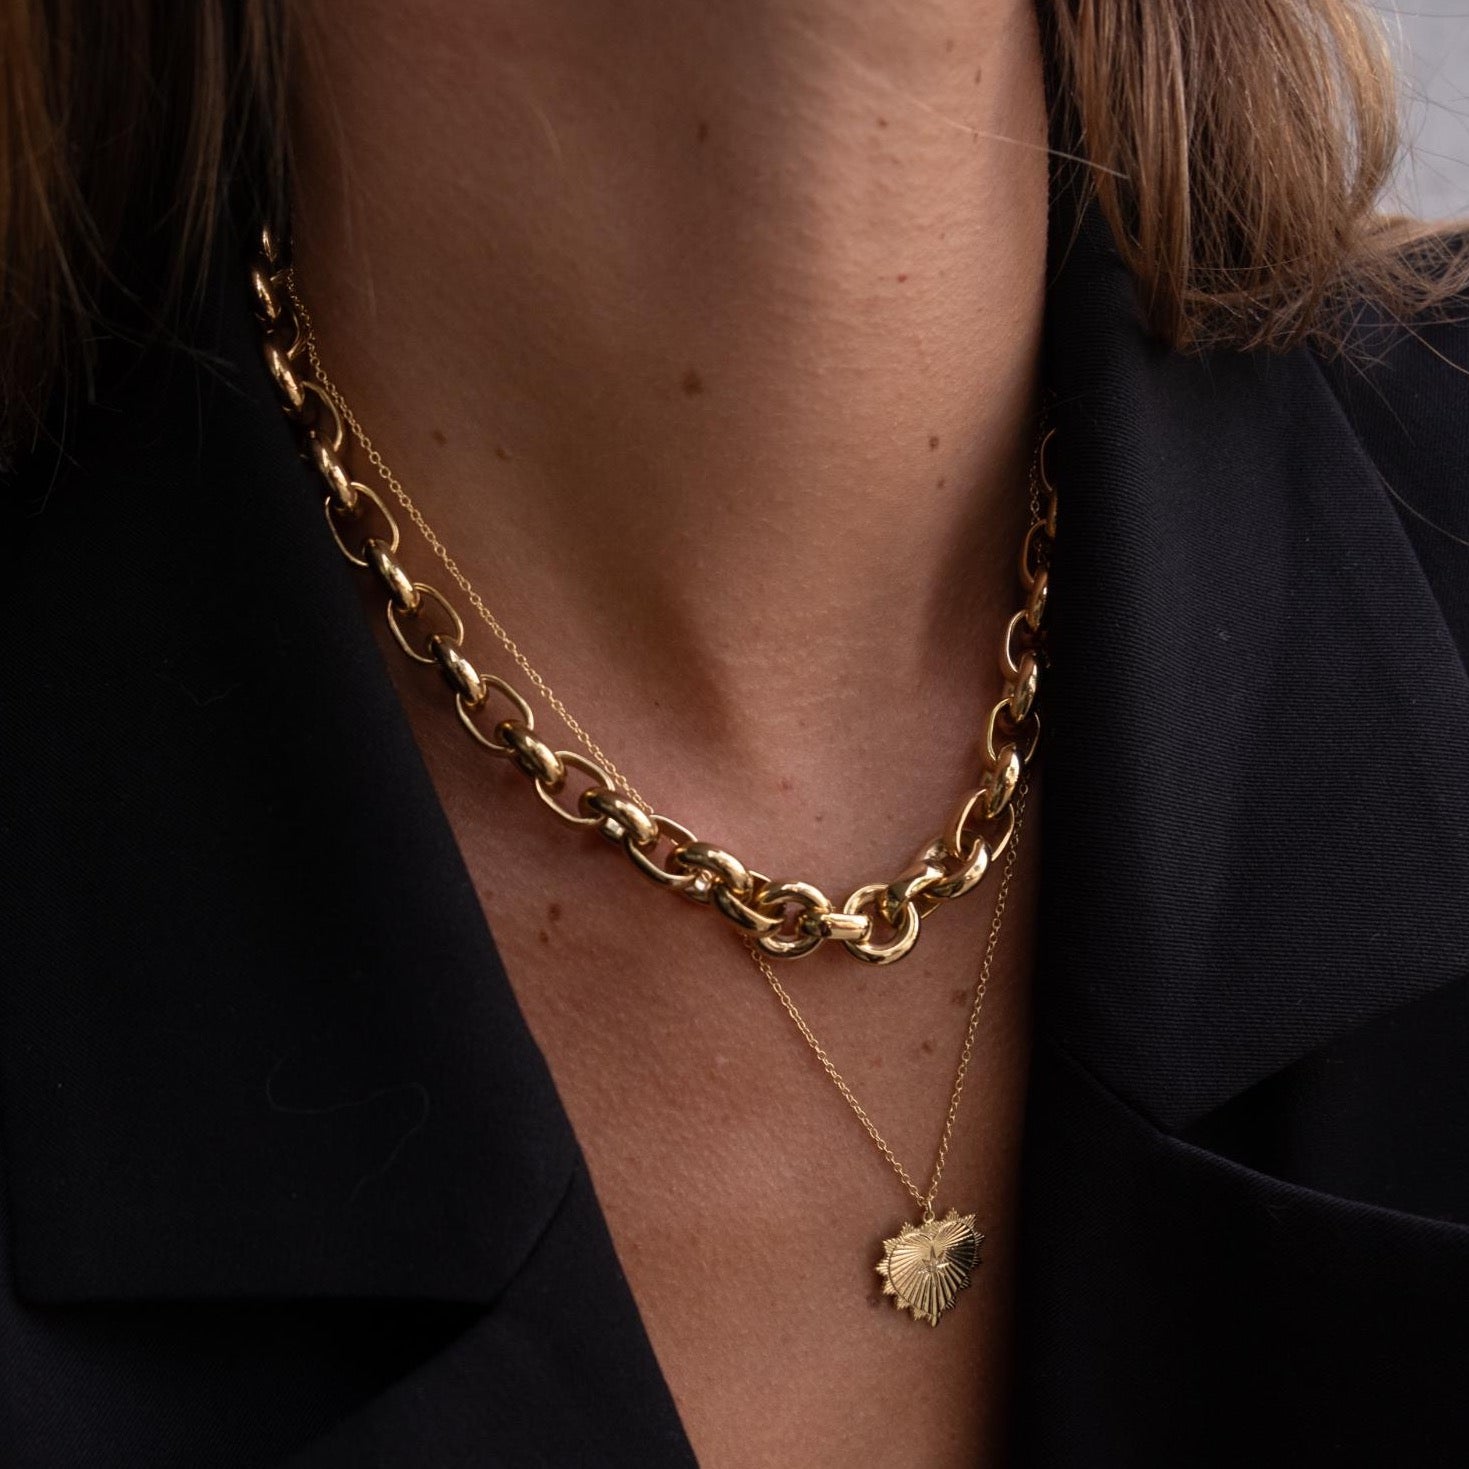 Silk & Steel Jewellery Trends for Minimalist or Maximalist, including statement and fine necklace